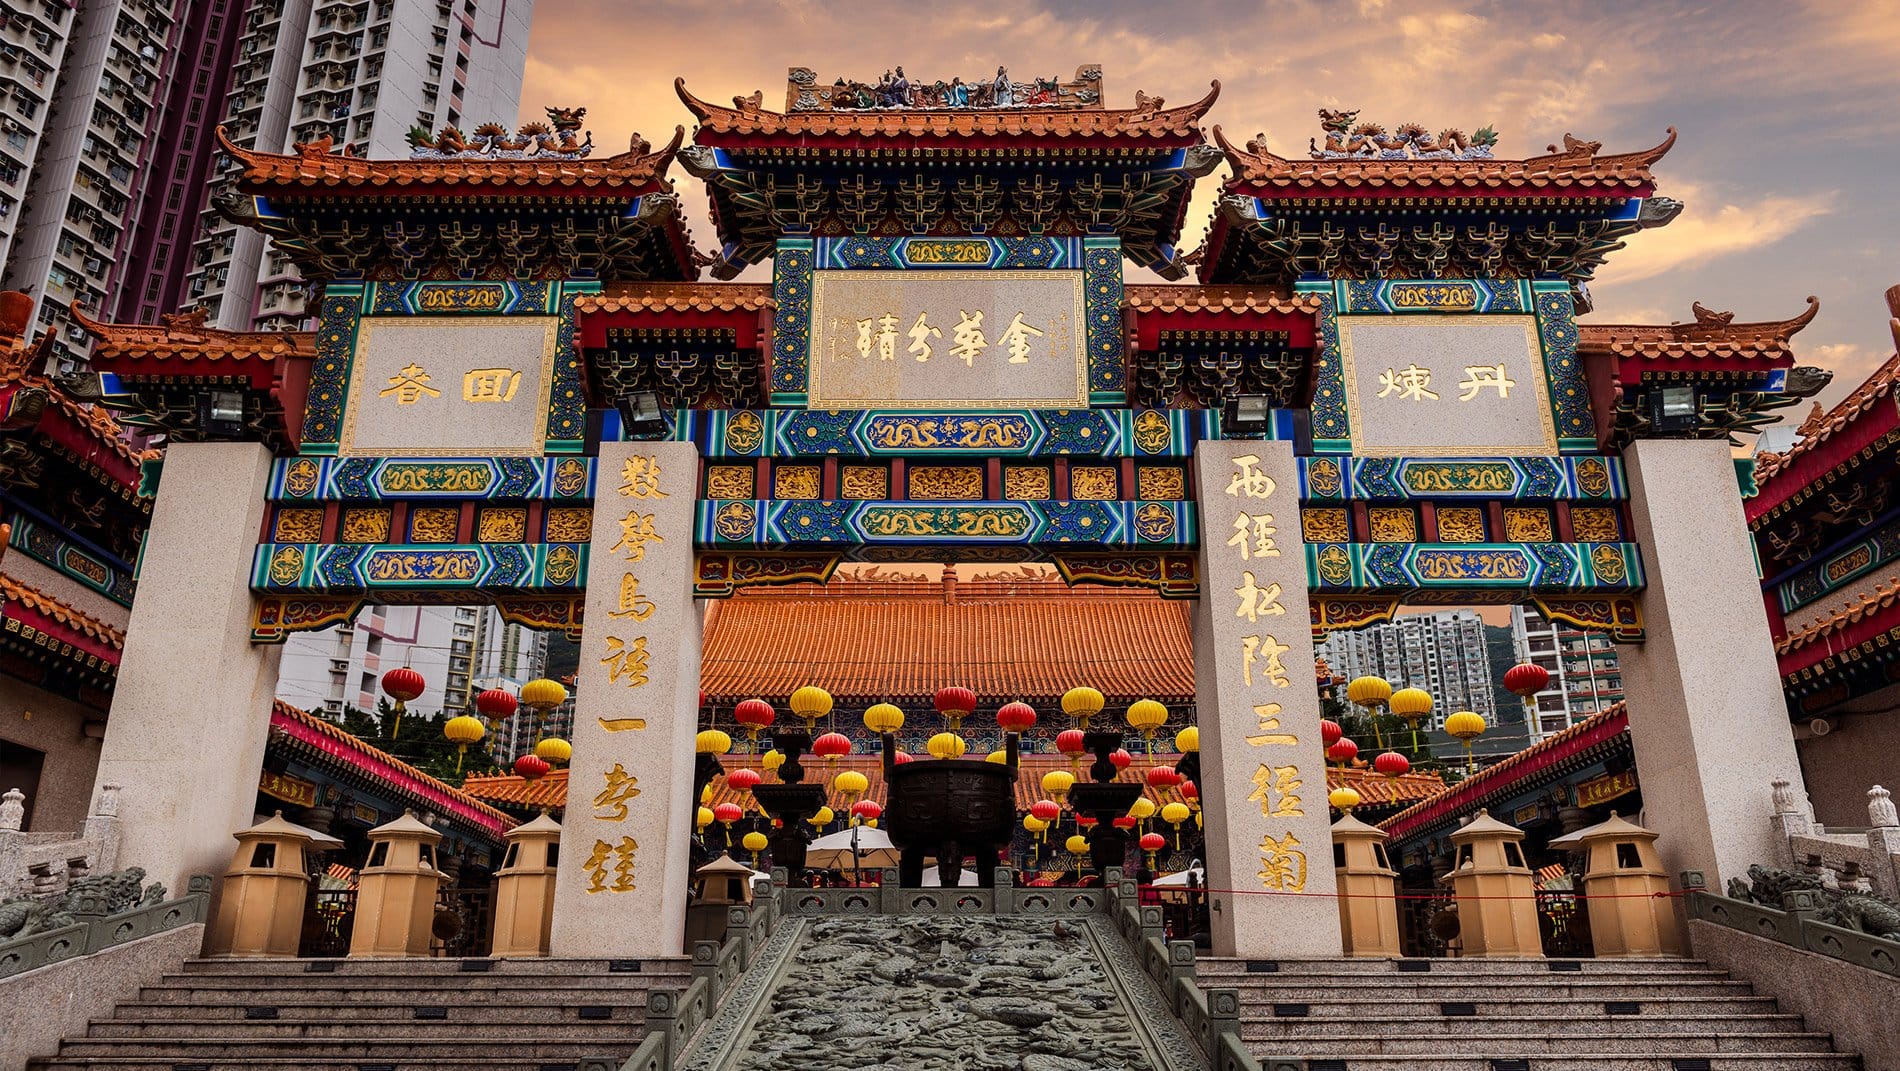 Wong Tai Sin Temple~During the rapid rise of Hong Kong in the '50's and '60's, Wong Tai Sin cemented its place in the heart of locals and recent immigrants alike as the people's temple where prayers were answered whether placed to Buddhist, Confucian or Daoist divinities.